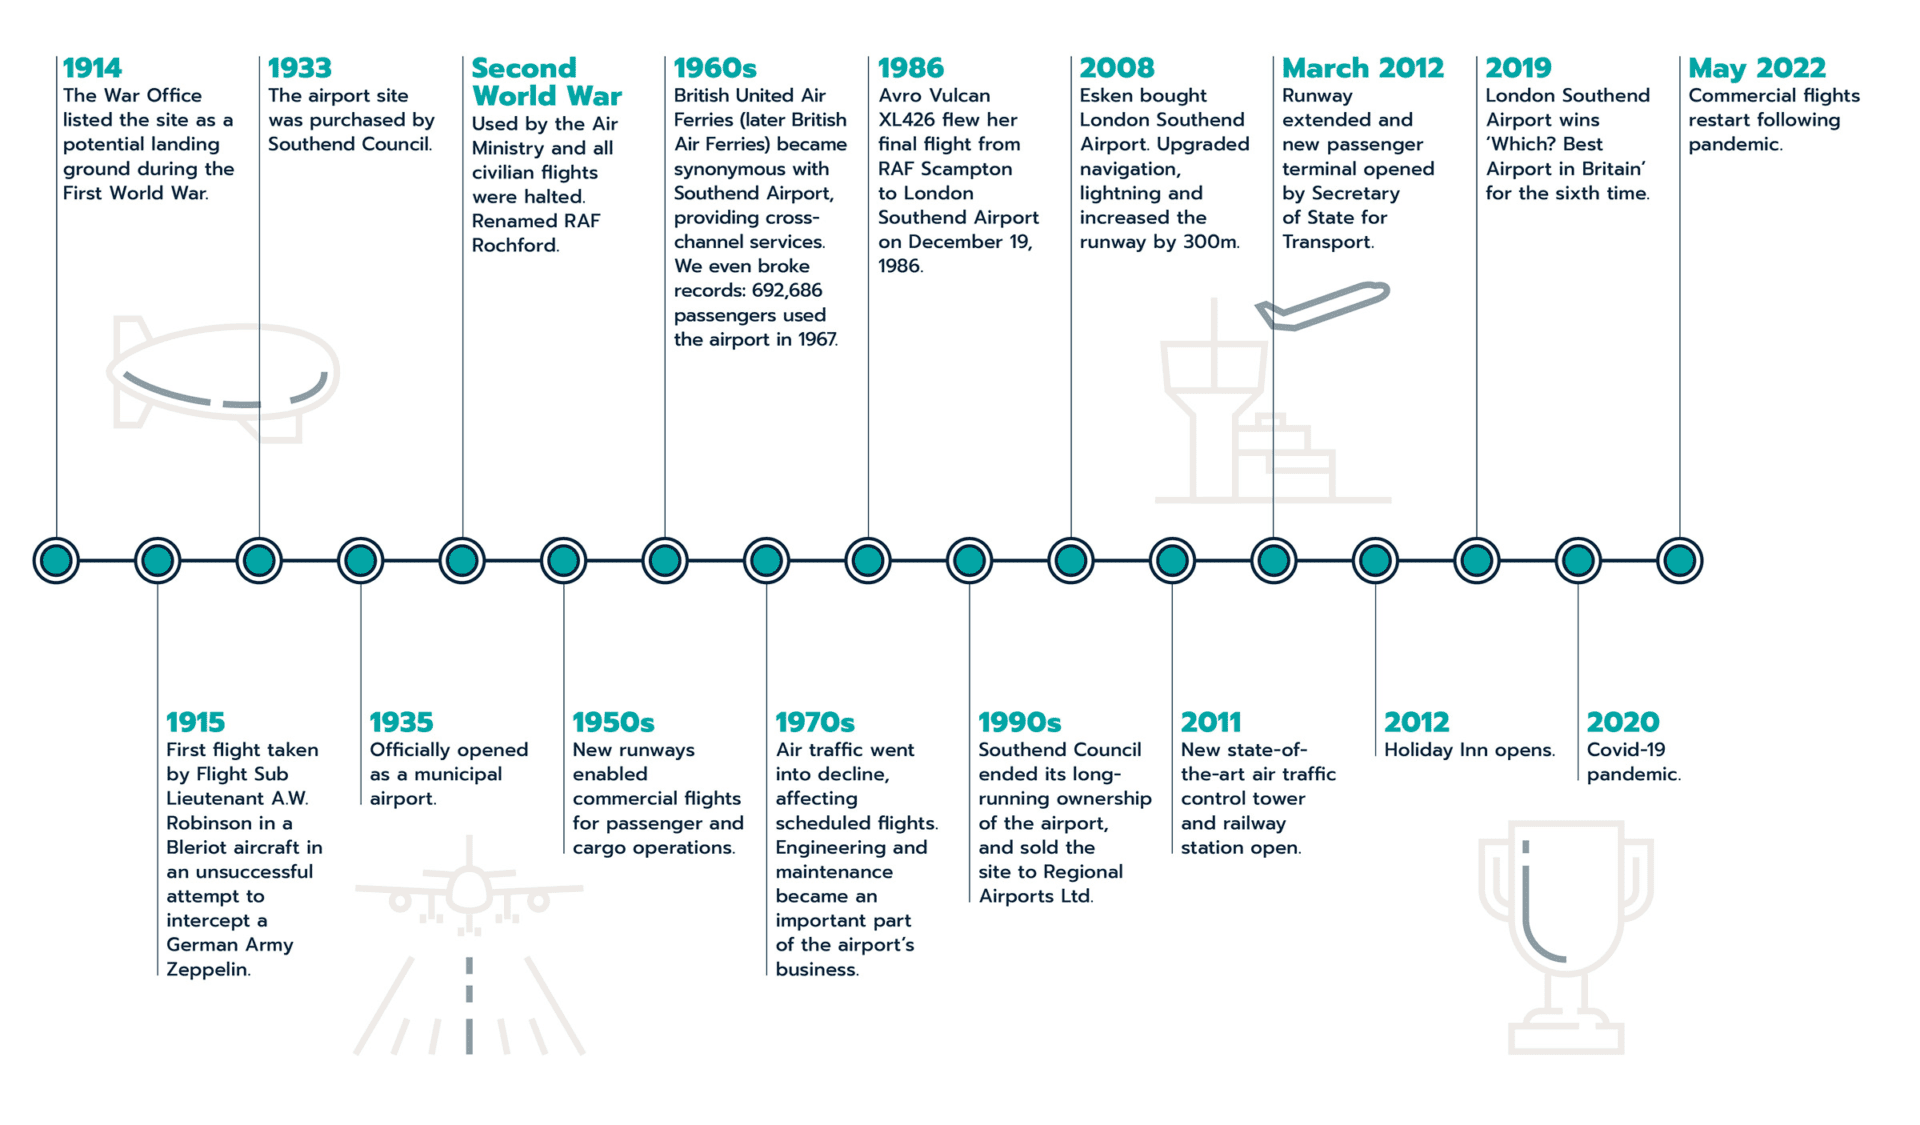 London Southend Airport's timeline, from when the War Office listed the airport as a potential landing ground during the First World War in 194, to when it was officially opened as a municipal airport in 1935, Esken purchasing the airport in 2008 and beyond.